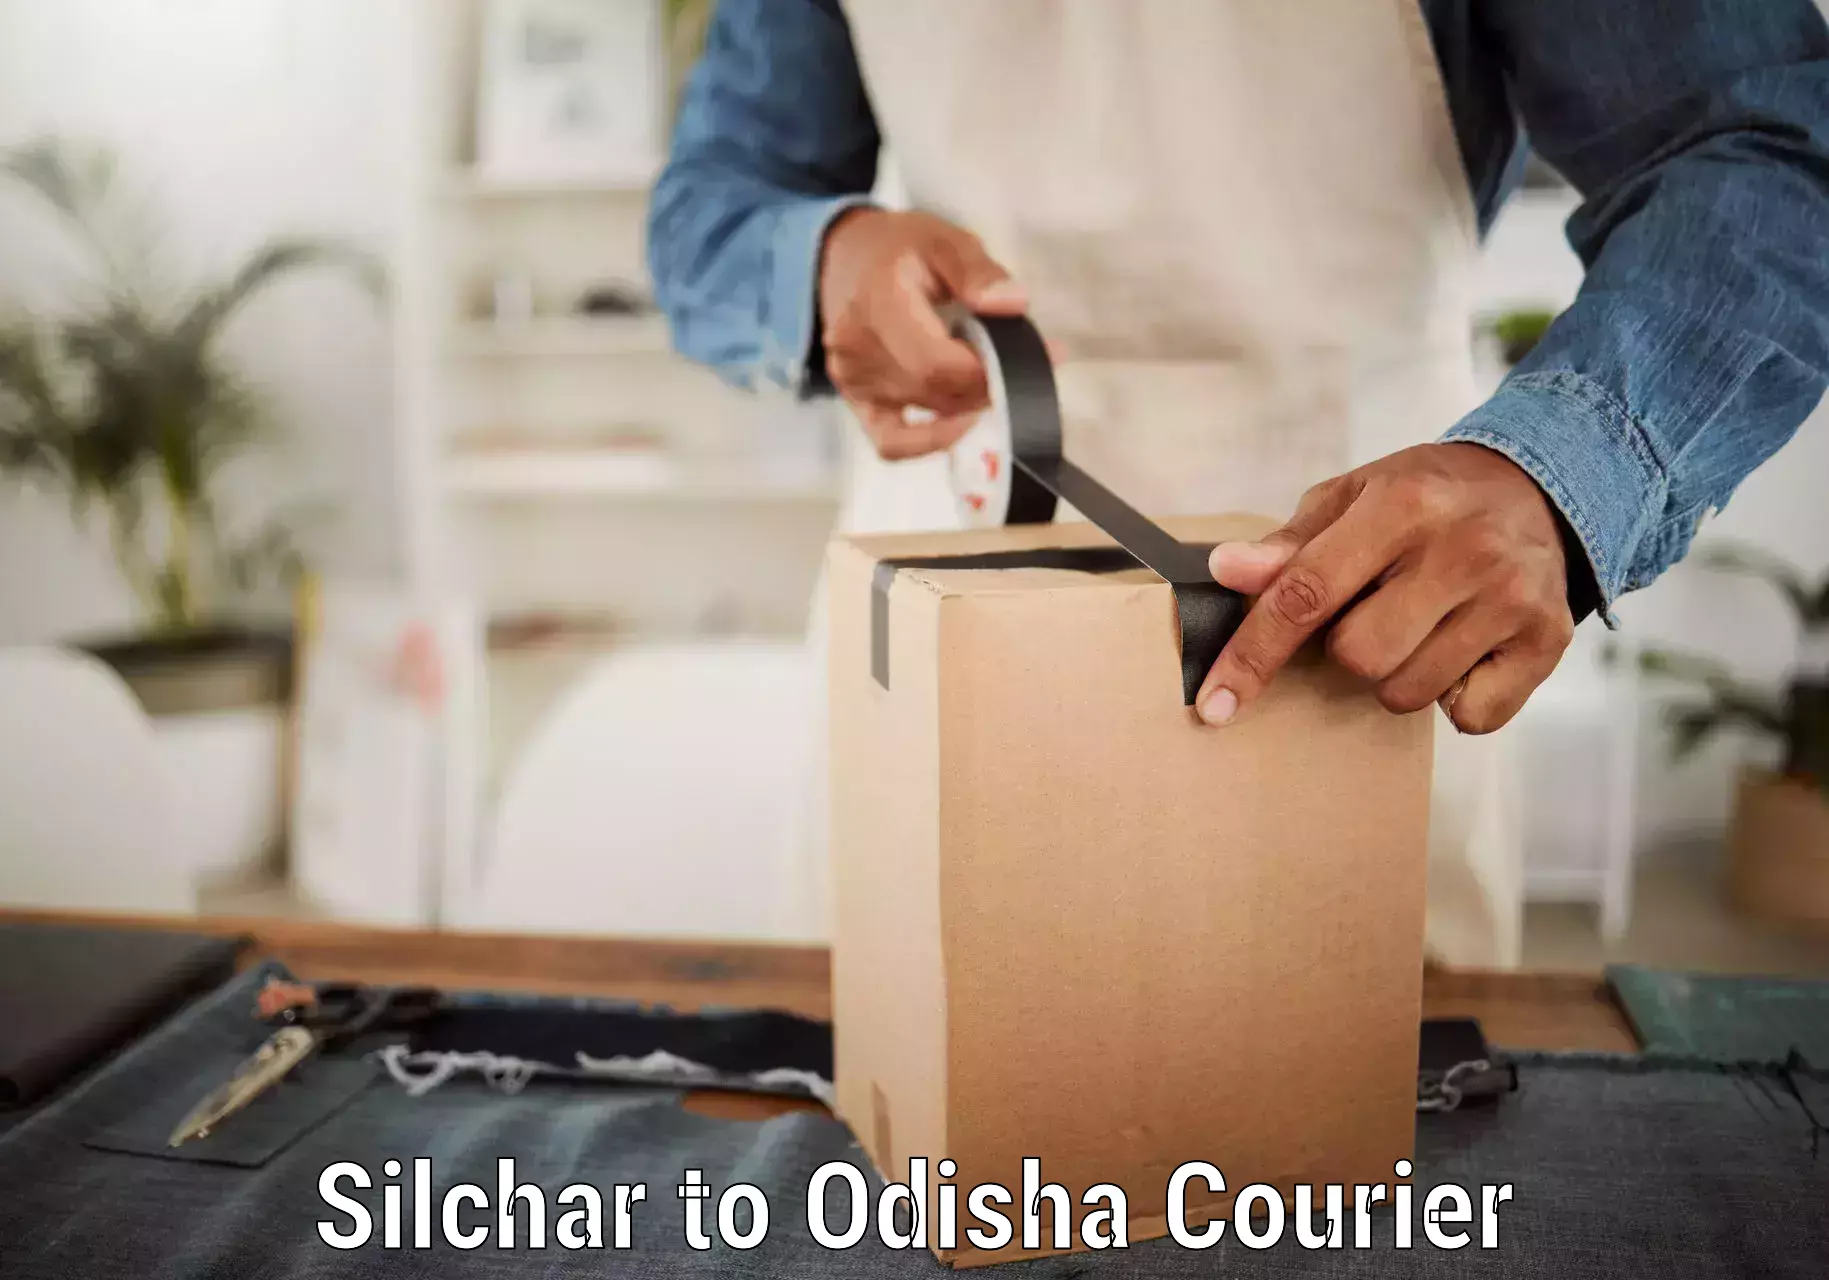 24/7 courier service Silchar to Dhamara